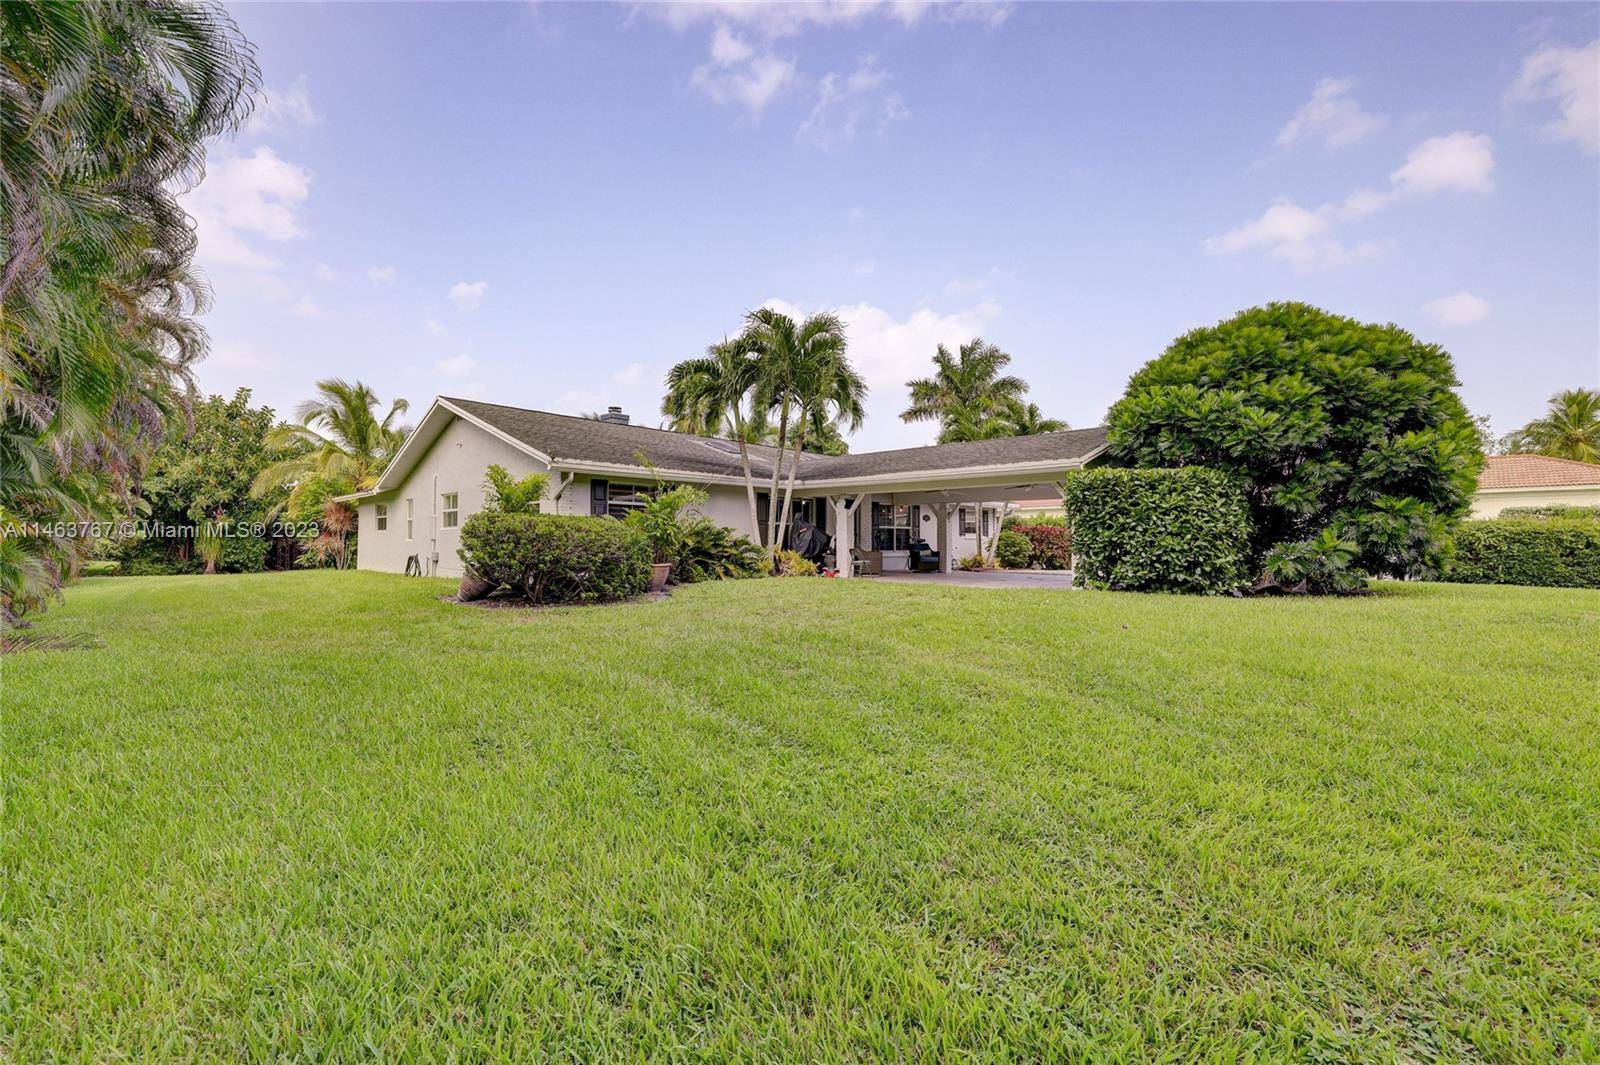 Welcome home to your private peaceful sanctuary, nestled in the heart of Davie.